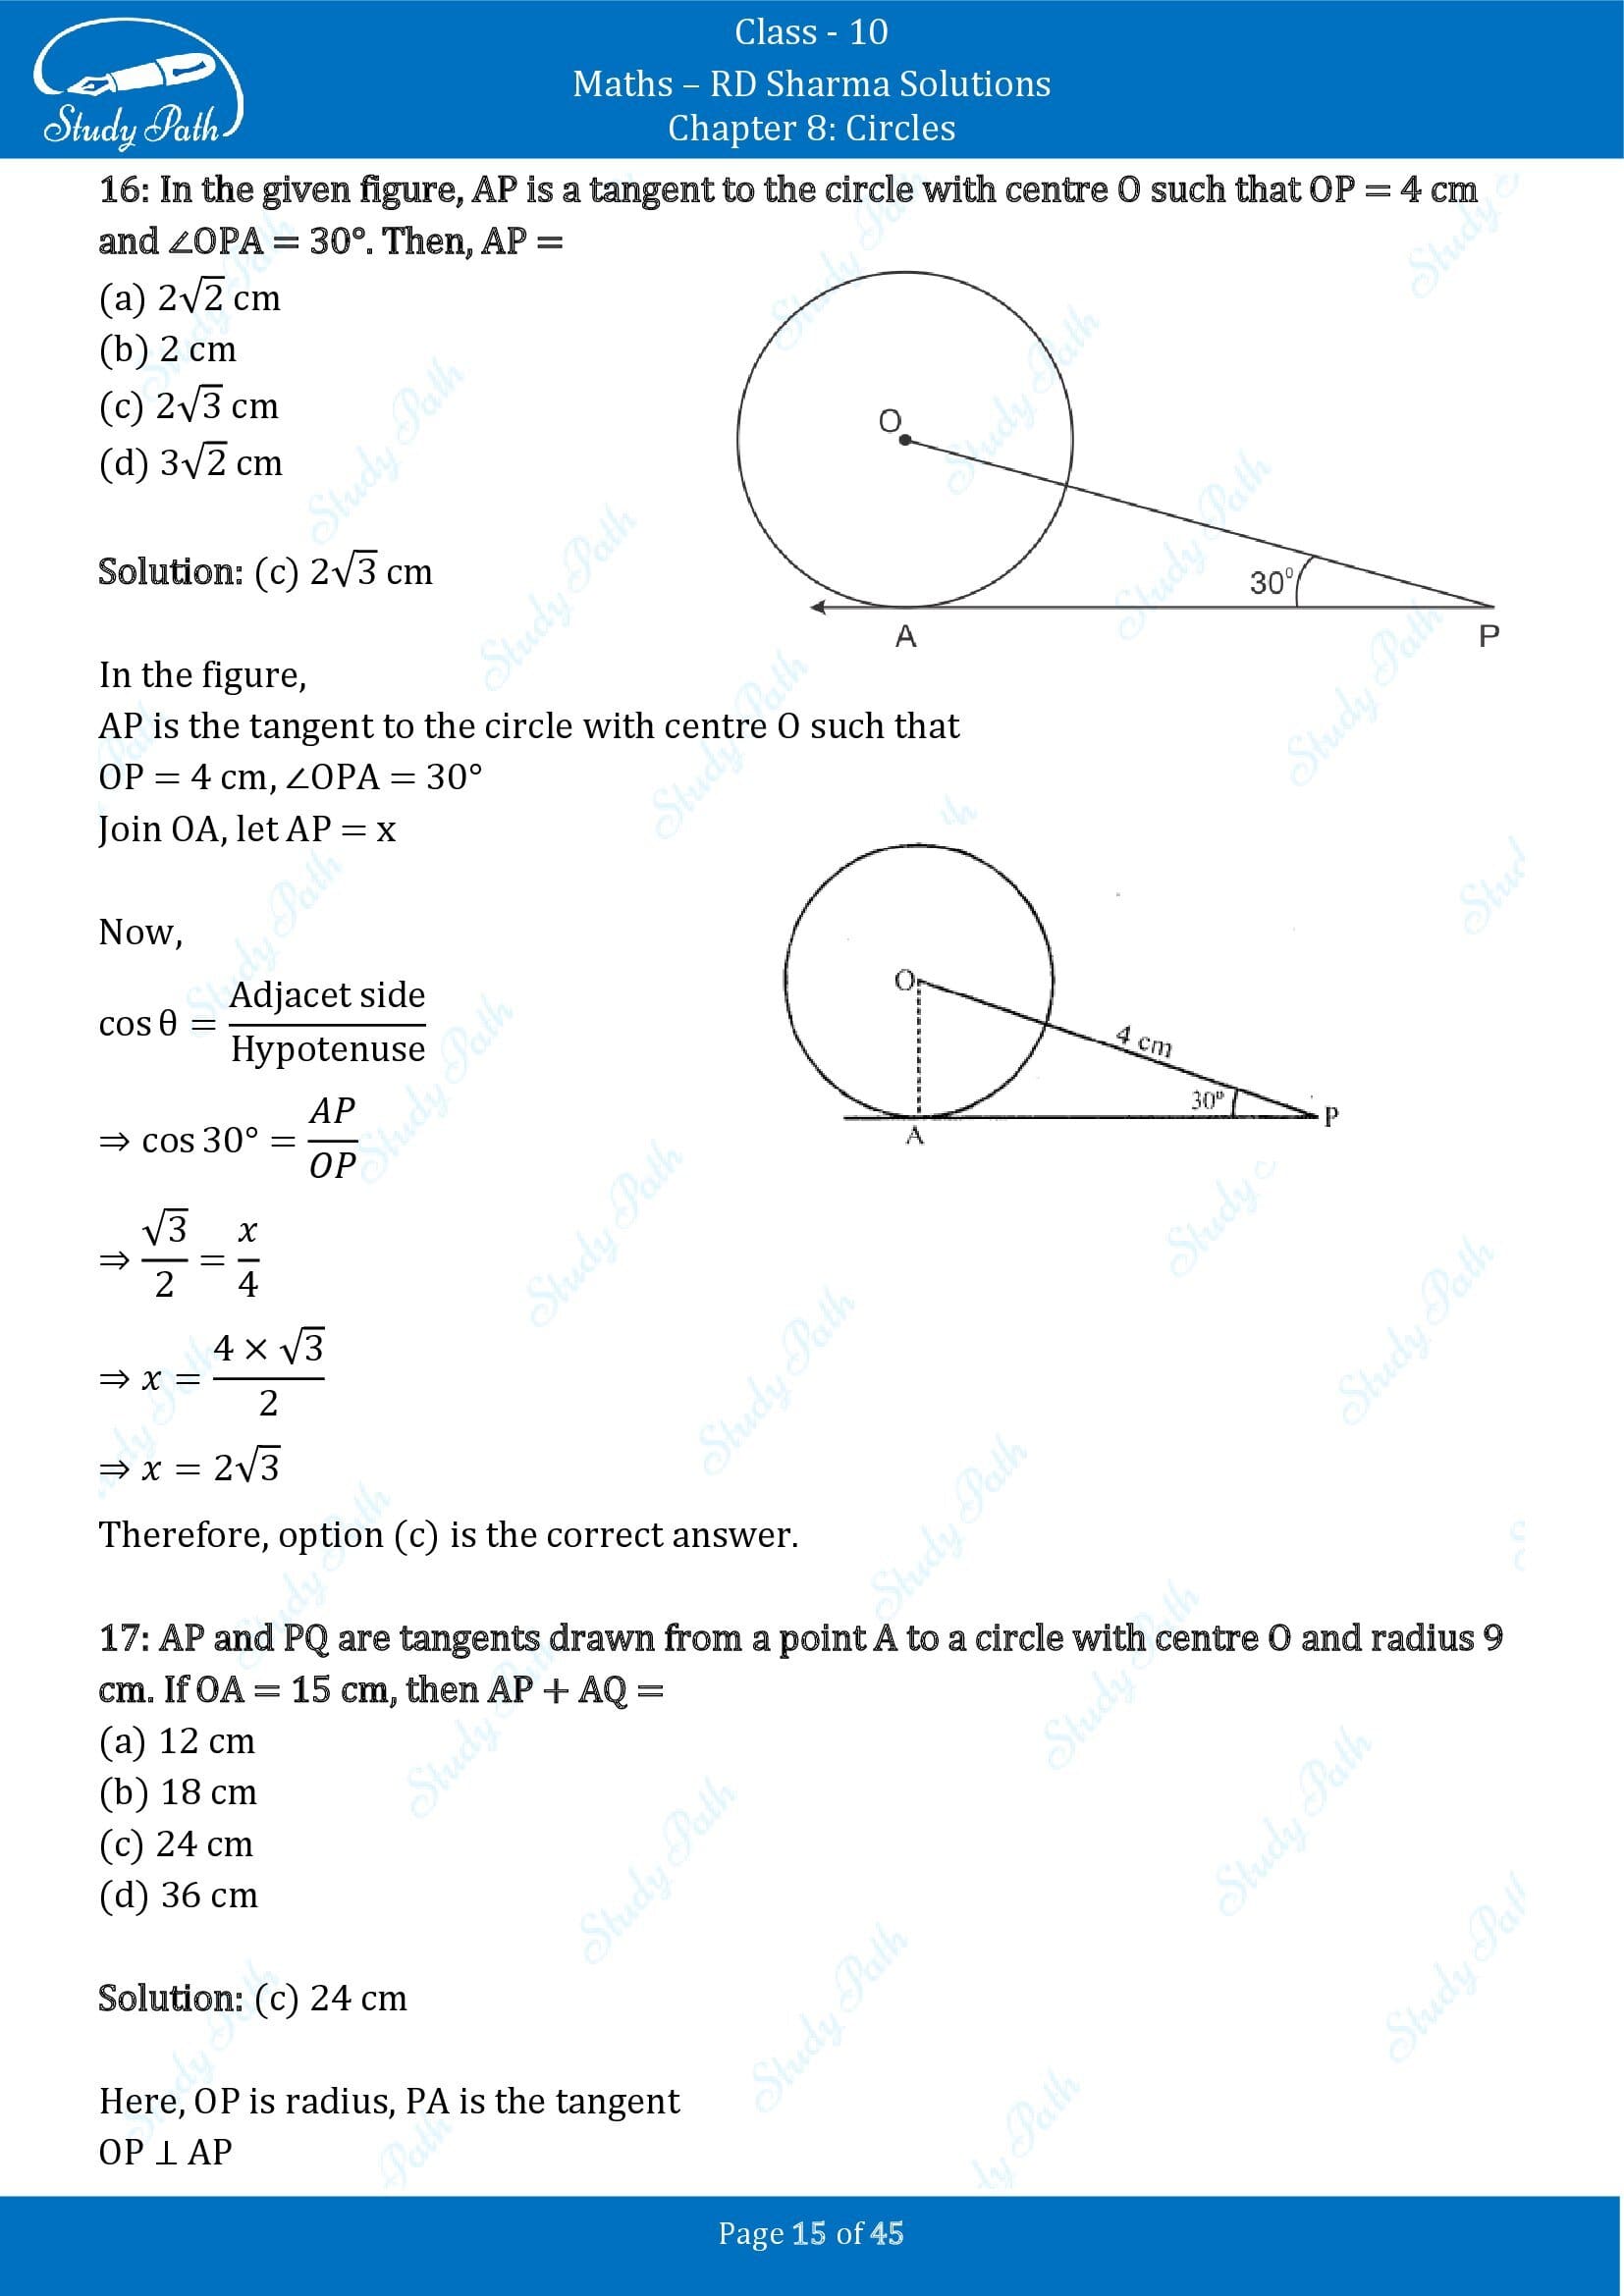 RD Sharma Solutions Class 10 Chapter 8 Circles Multiple Choice Questions MCQs 00015